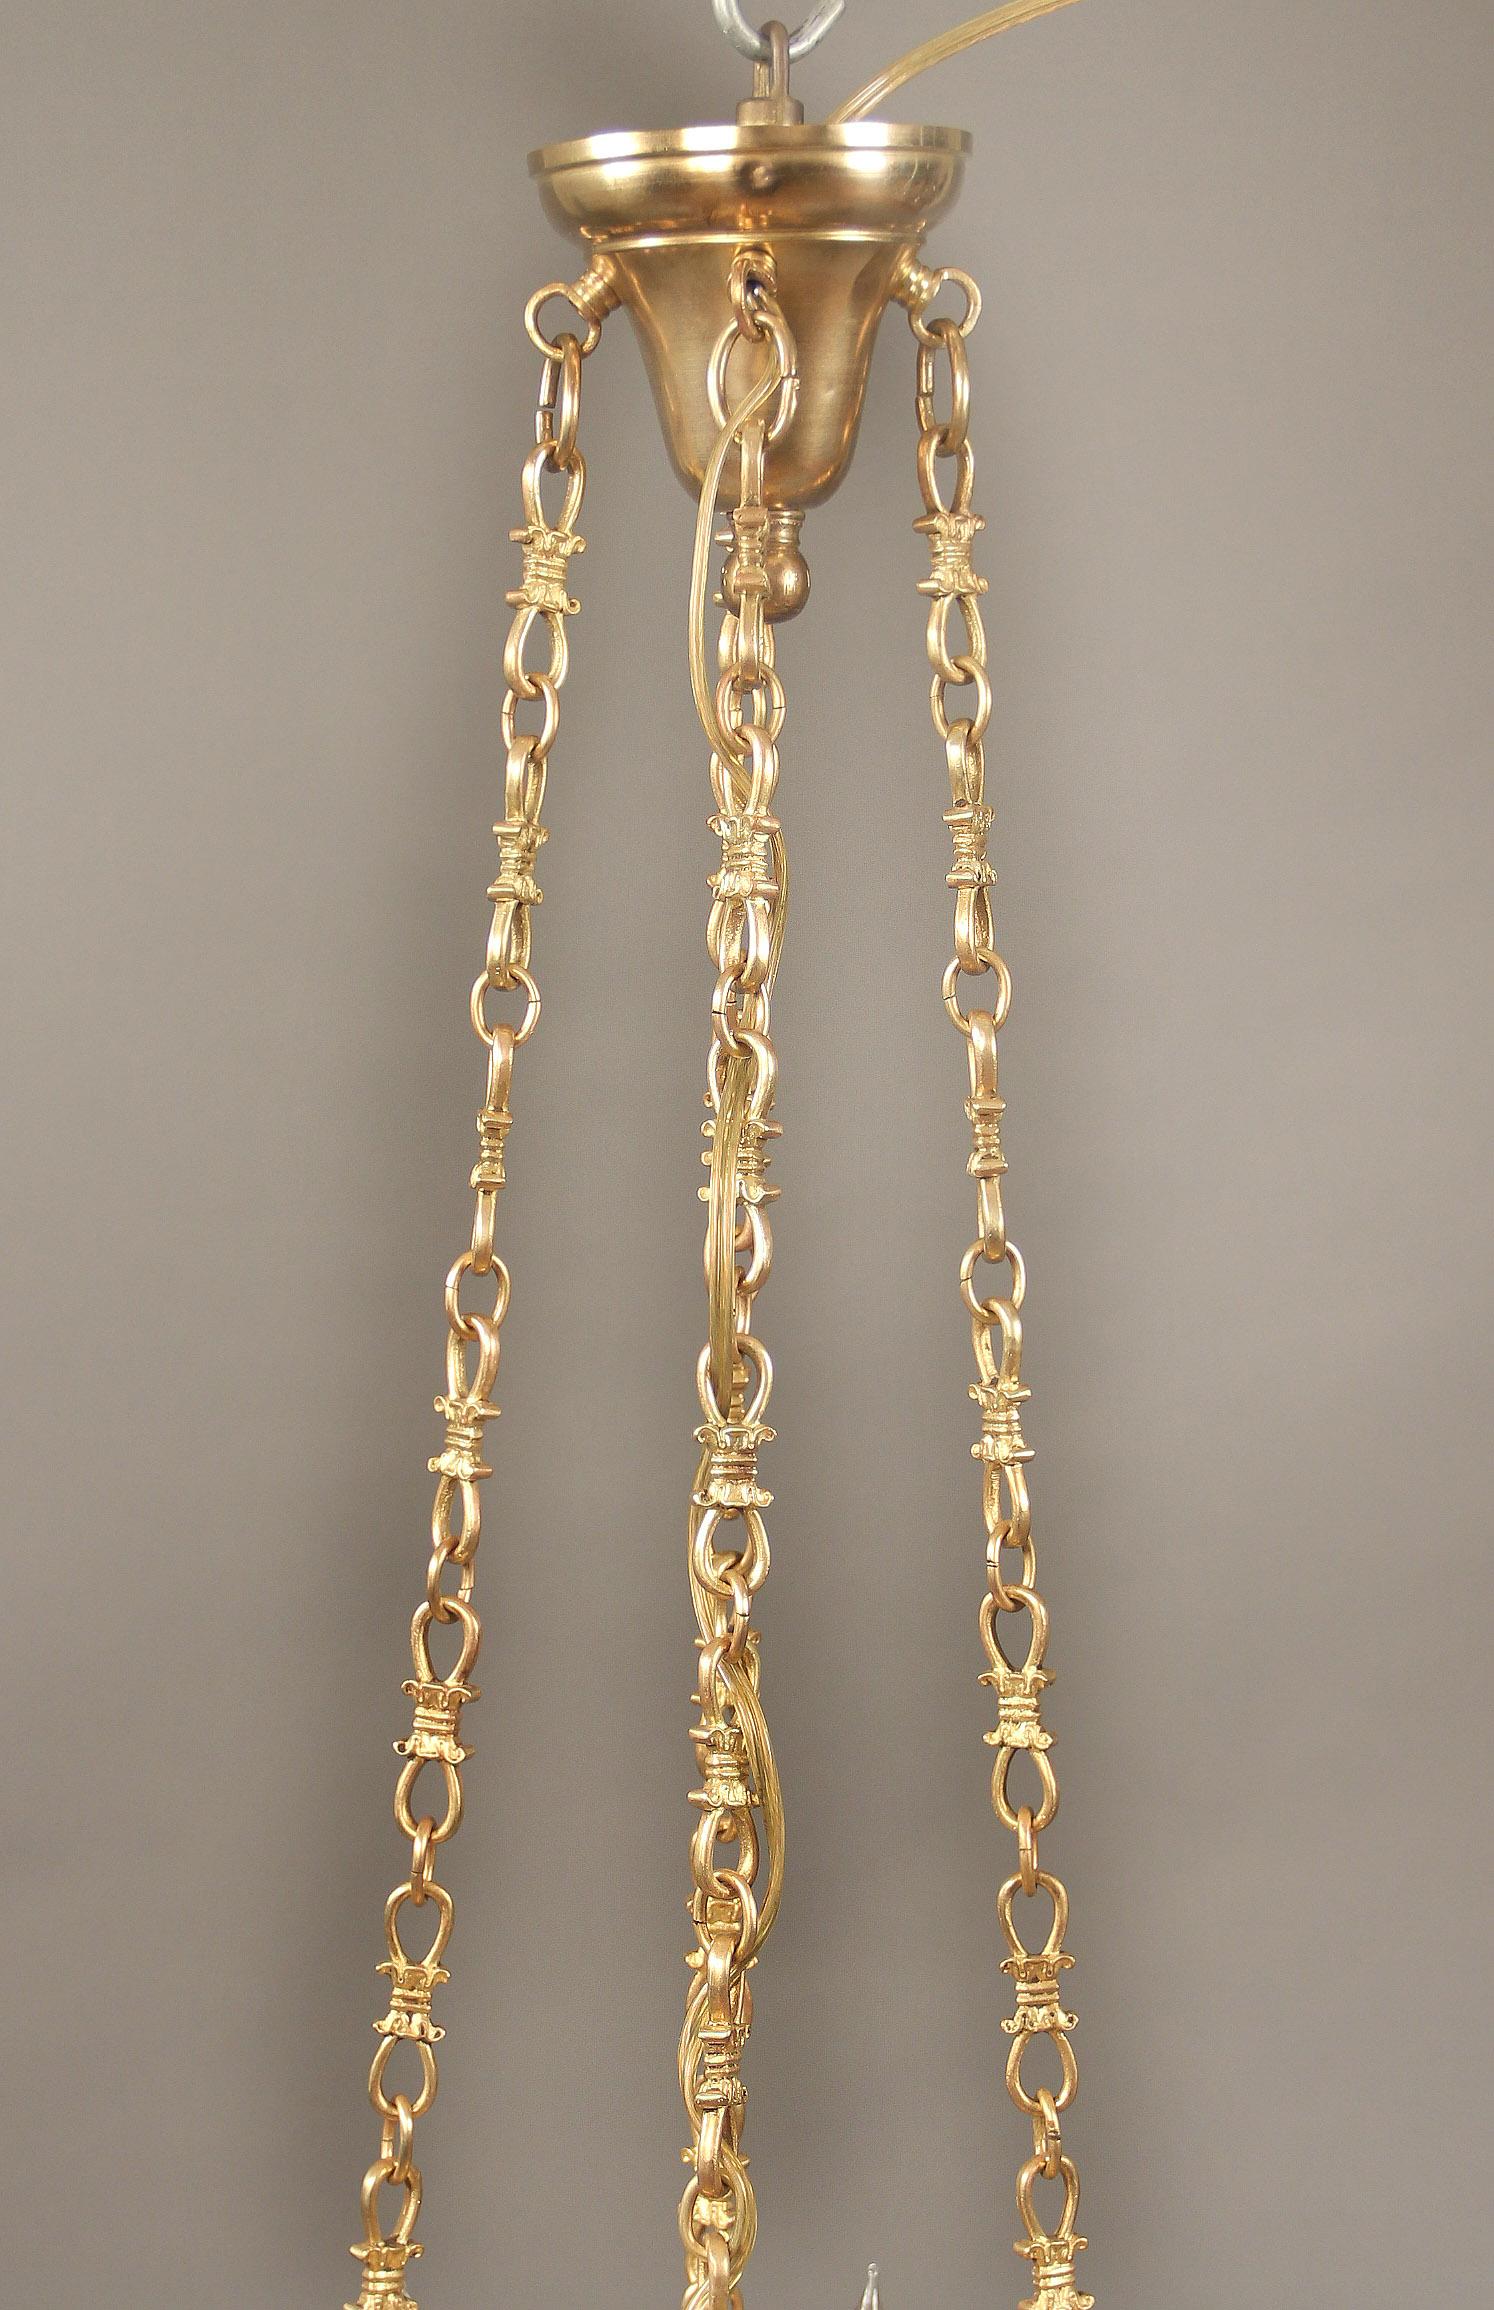 19th Century Interesting Late 19th-Early 20th Century Gilt Bronze Empire Style Chandelier For Sale